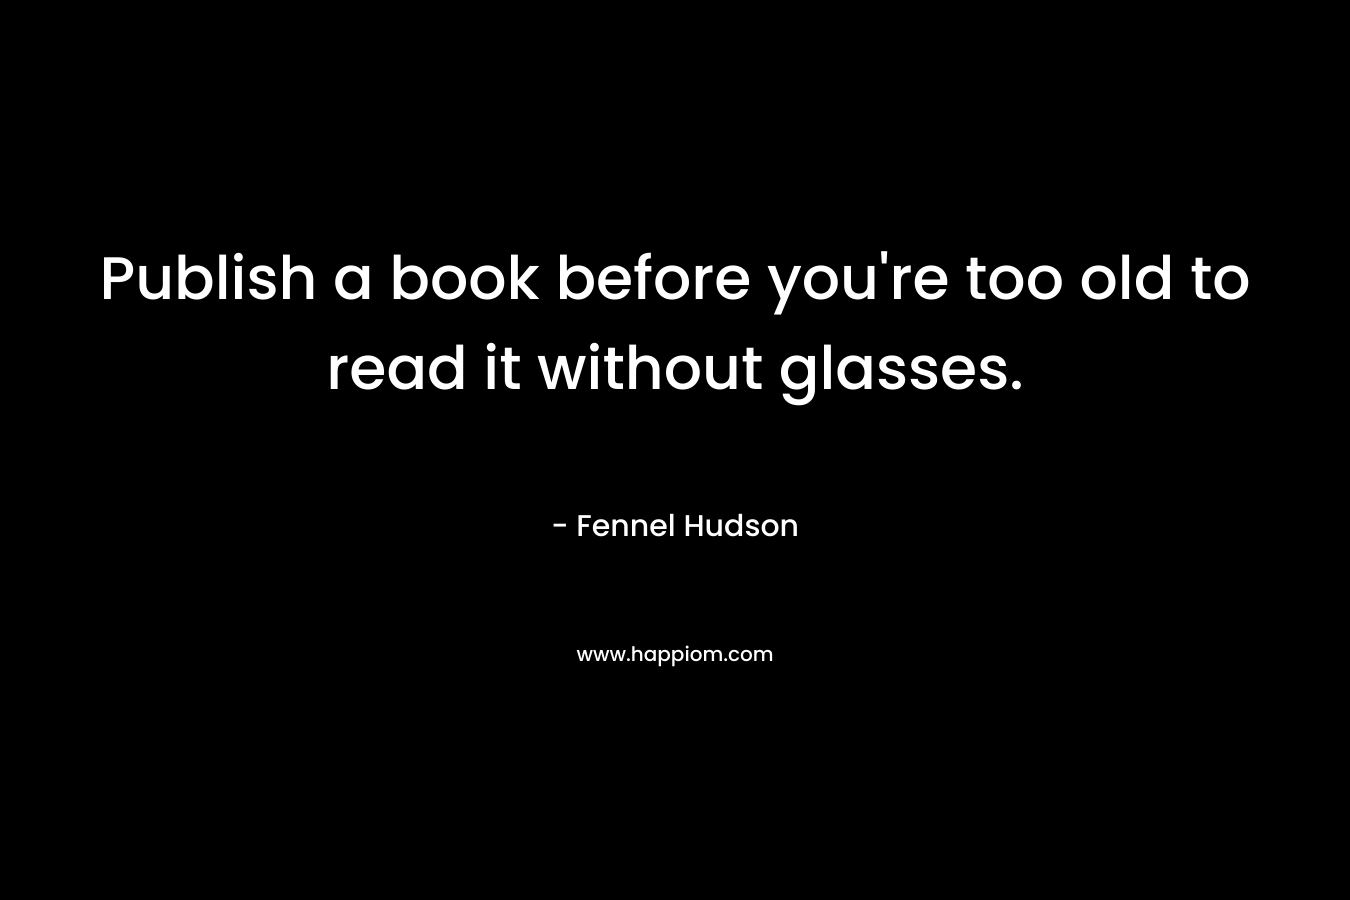 Publish a book before you’re too old to read it without glasses. – Fennel Hudson